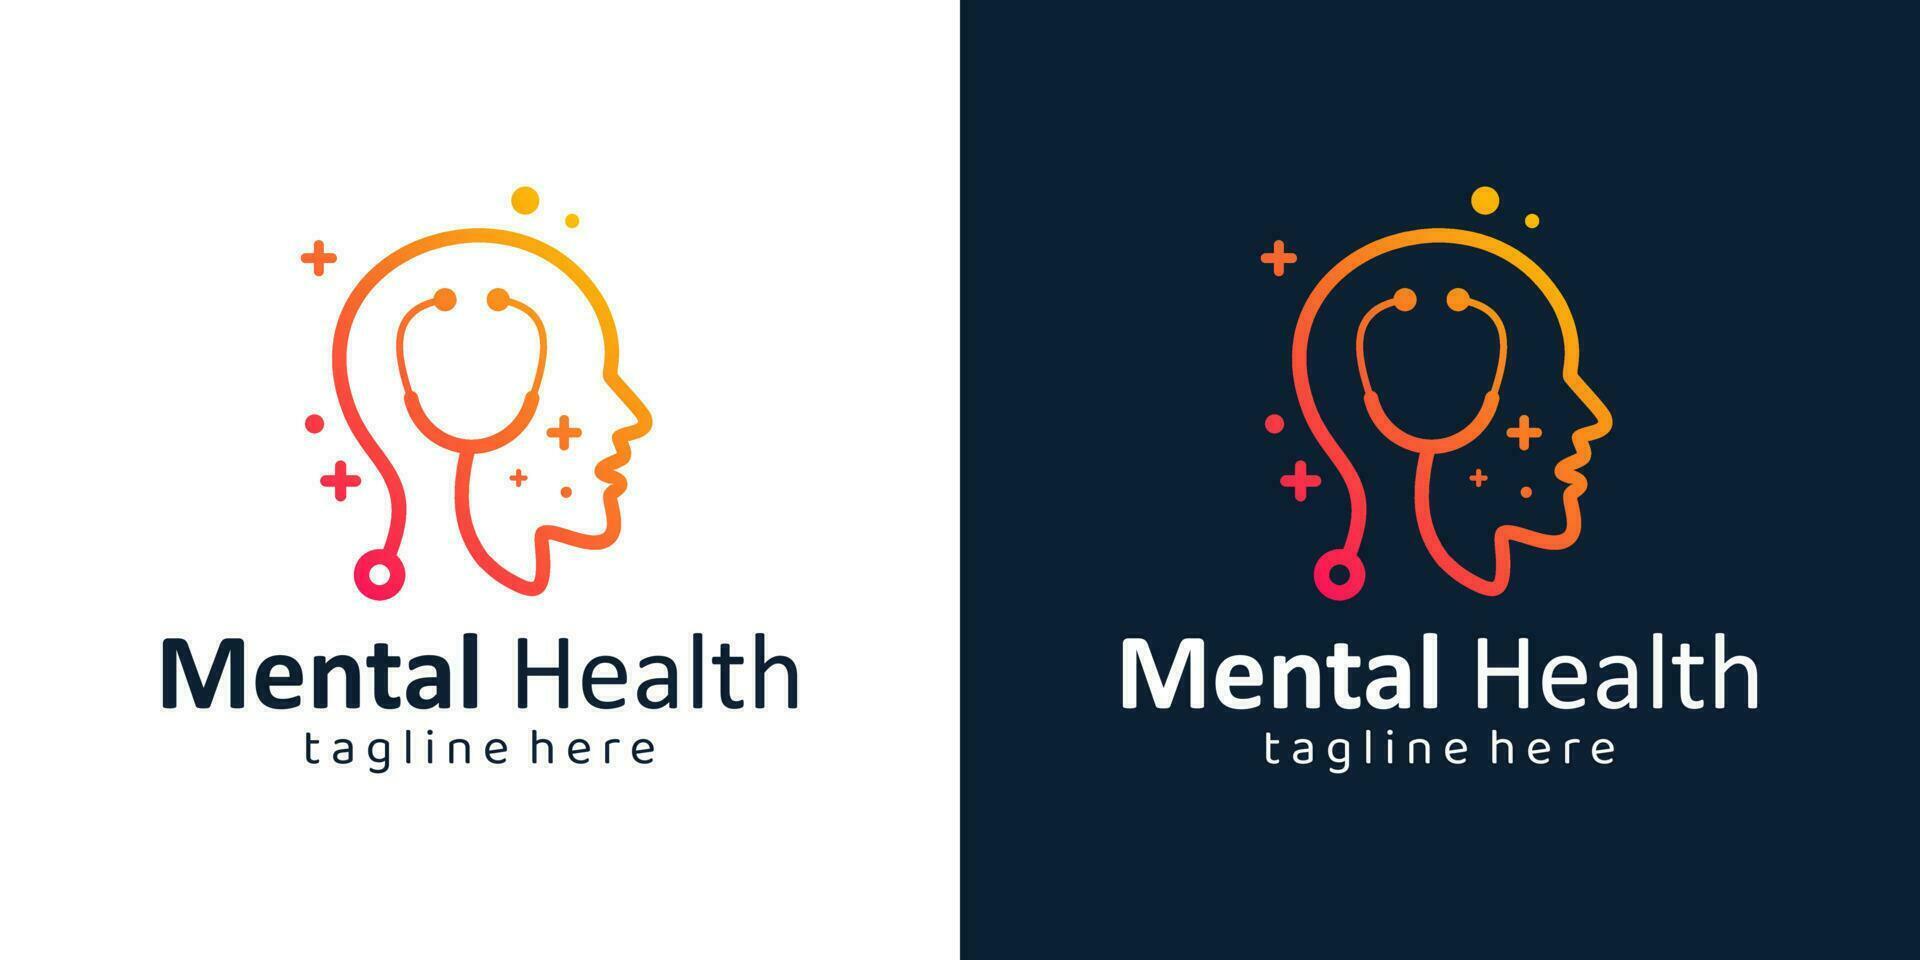 Mental health logo design. Psychotherapy symbol concept. Human head with stethoscope graphic design vector illustration.